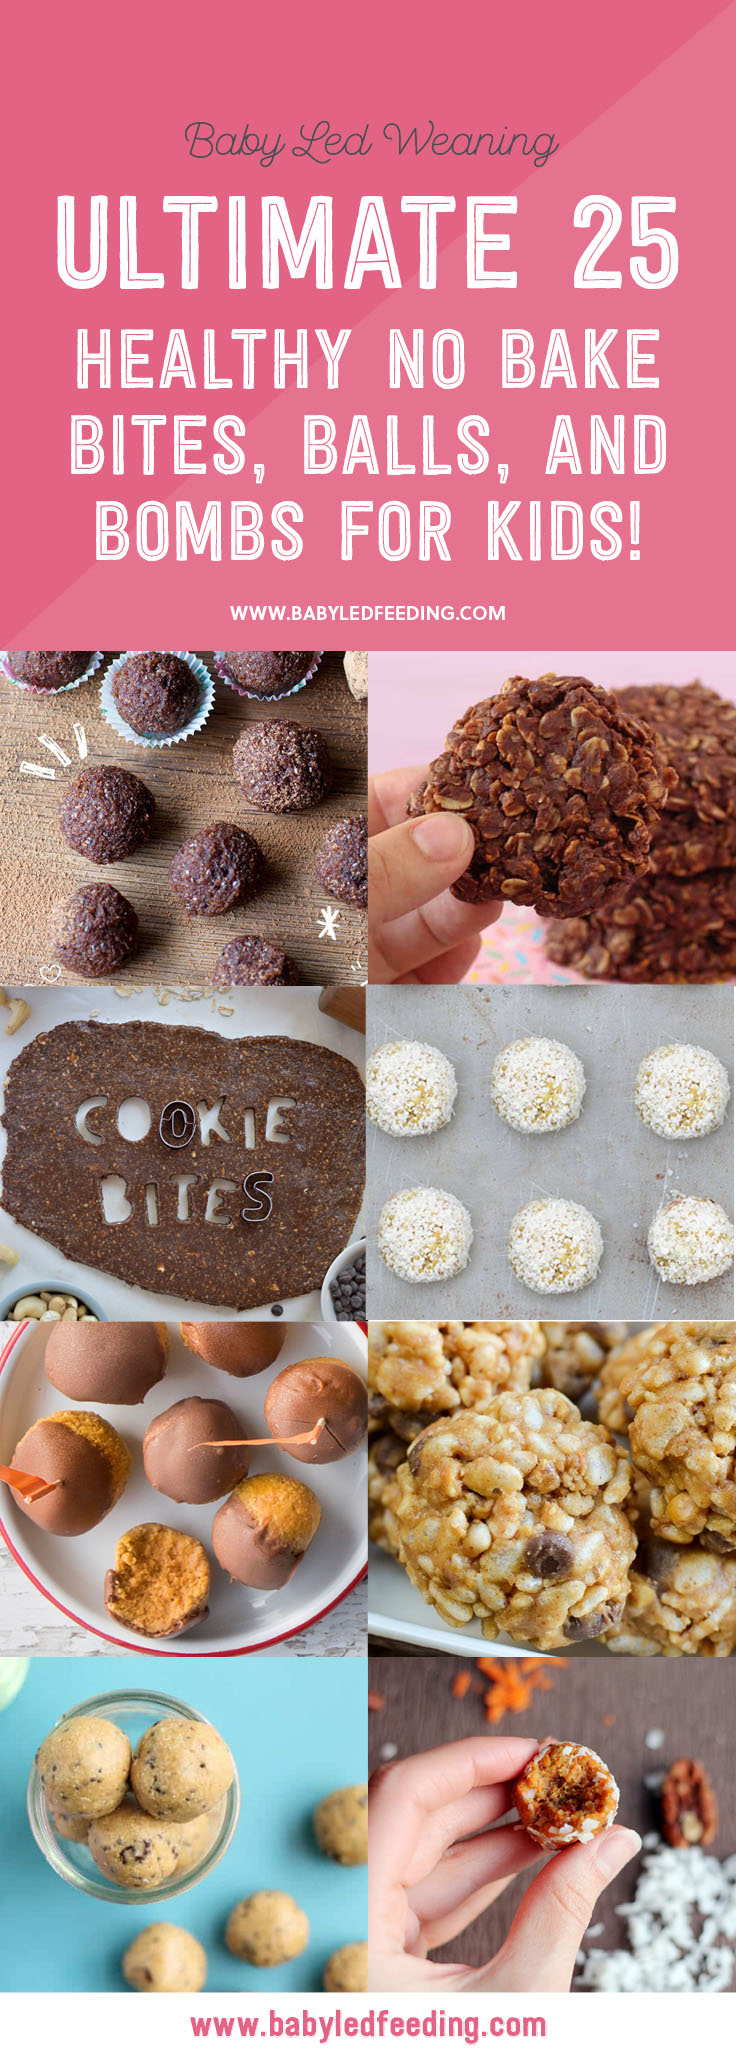 The Ultimate List of Healthy NO-BAKE Bites, Balls, and Bombs for Kids! Several paleo, vegan, gluten free and allergy friendly recipe included! Check out these super easy snack ideas! #refinedsugarfree #amazeballs #nobake #nobakebites #babyedfeeding #kidfood #healthysnacks #nobakebombs